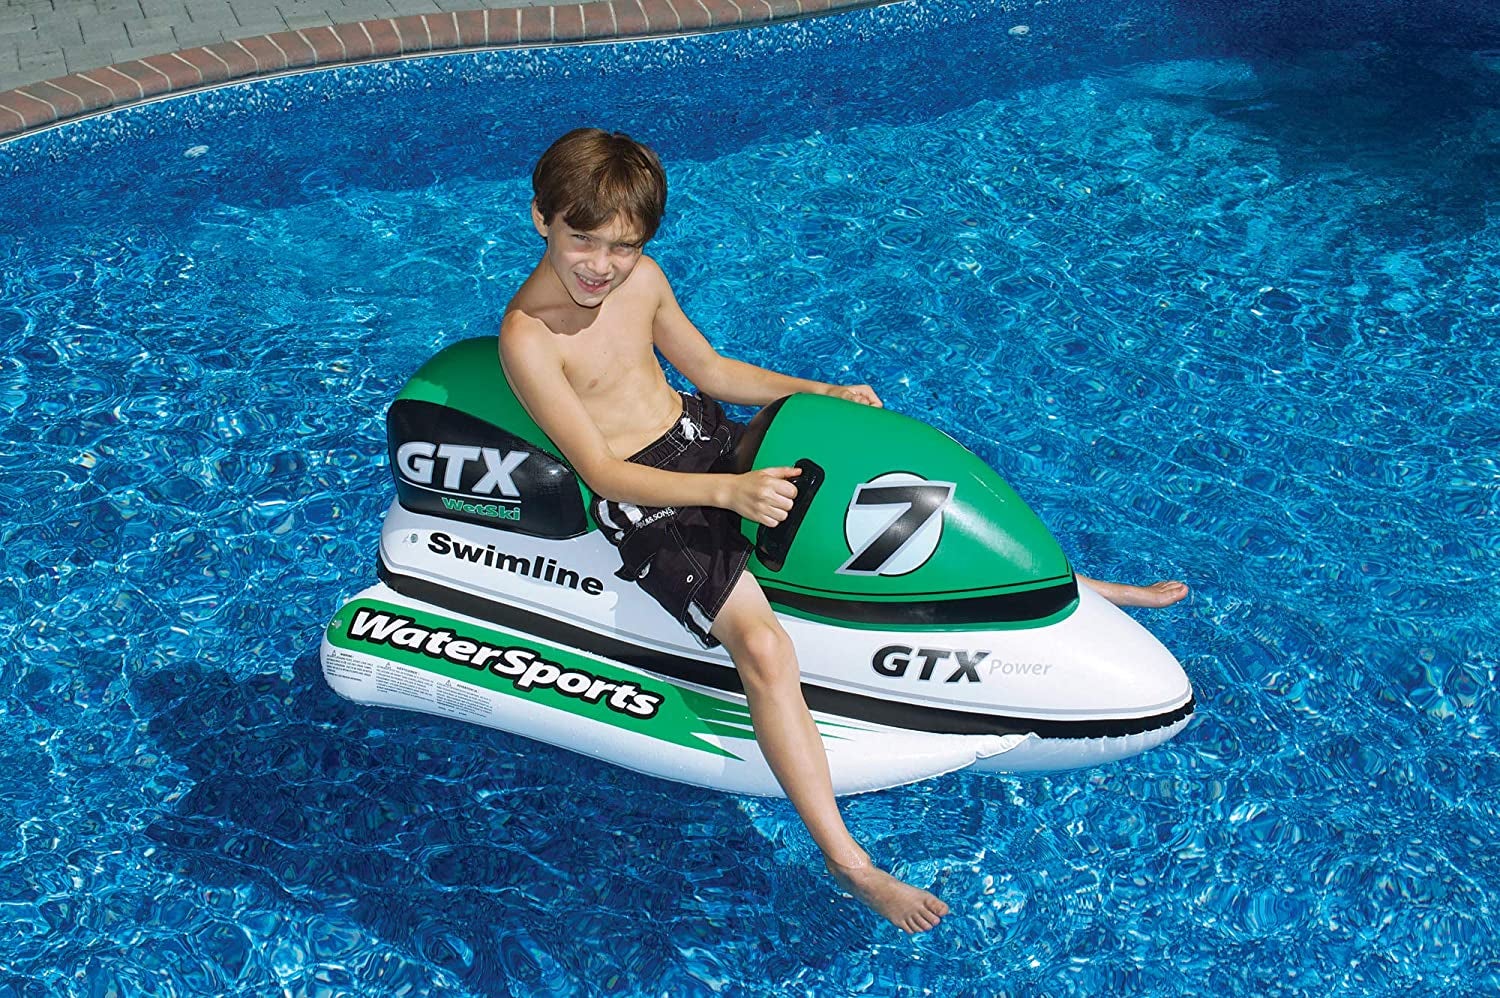 kid on black, green, and white jet ski float with handles